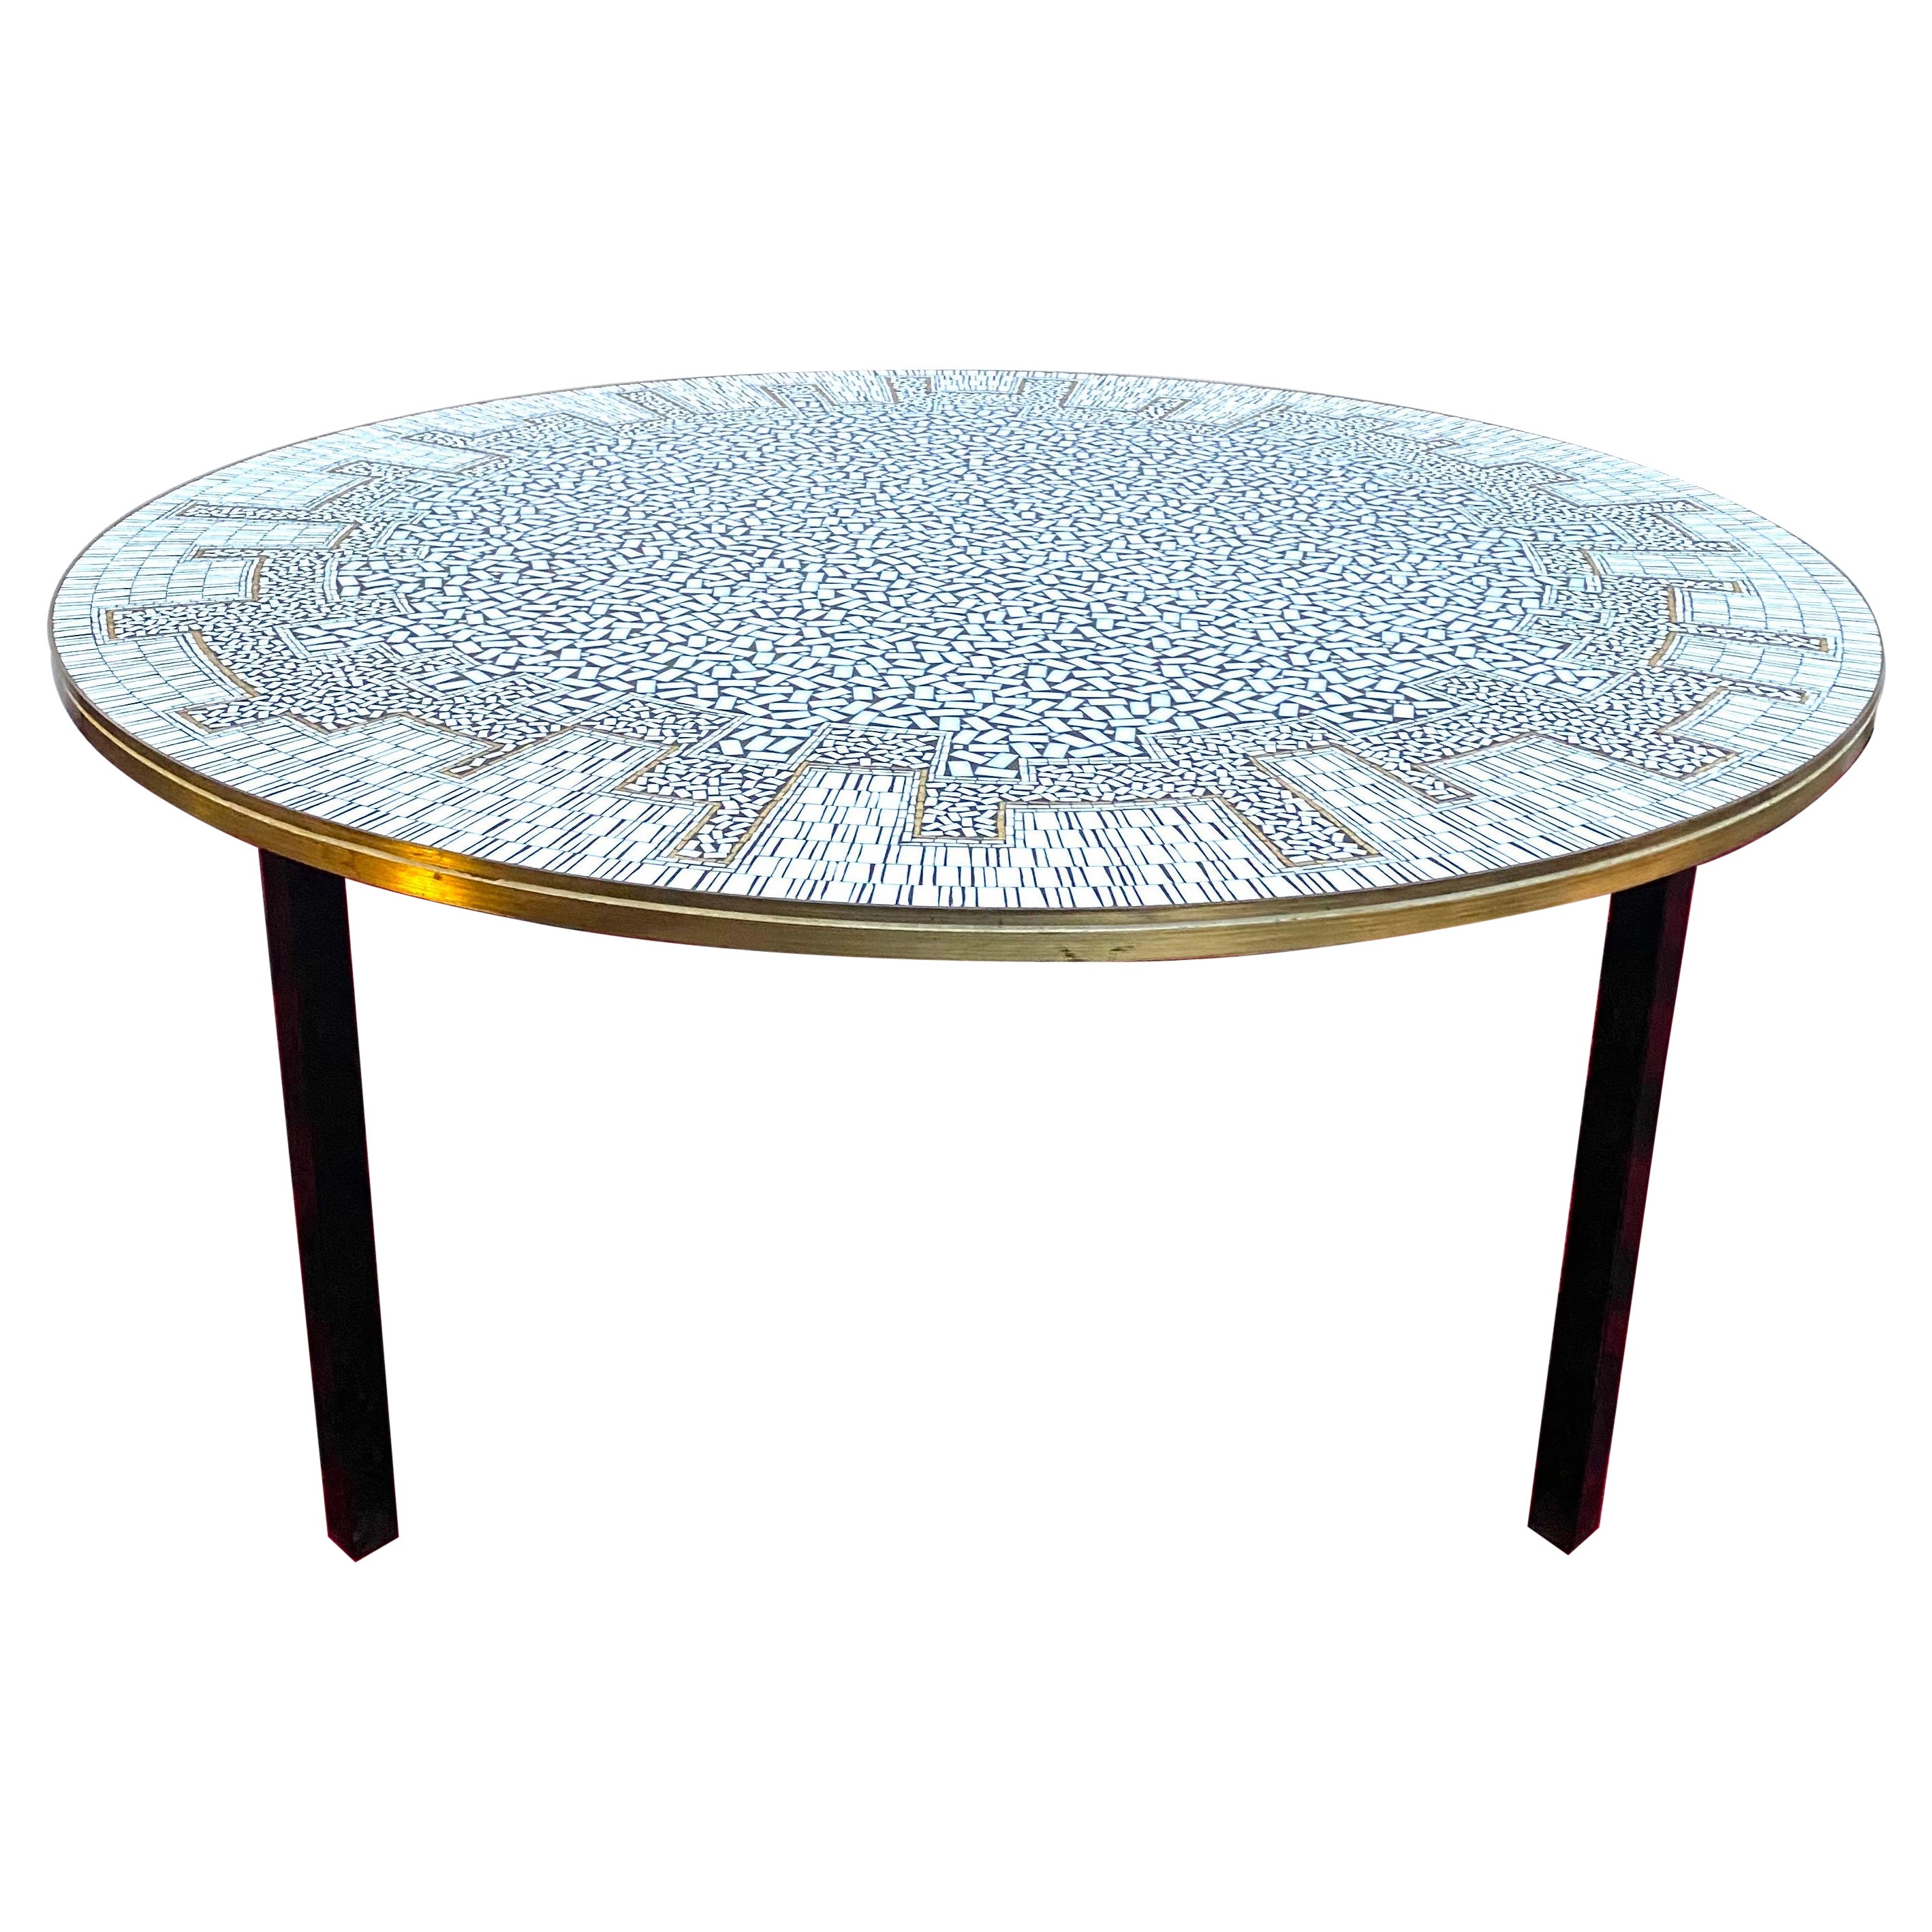 Large Round Mosaic Midcentury Coffetable by Berthold Müller Oerlinghausen 50s